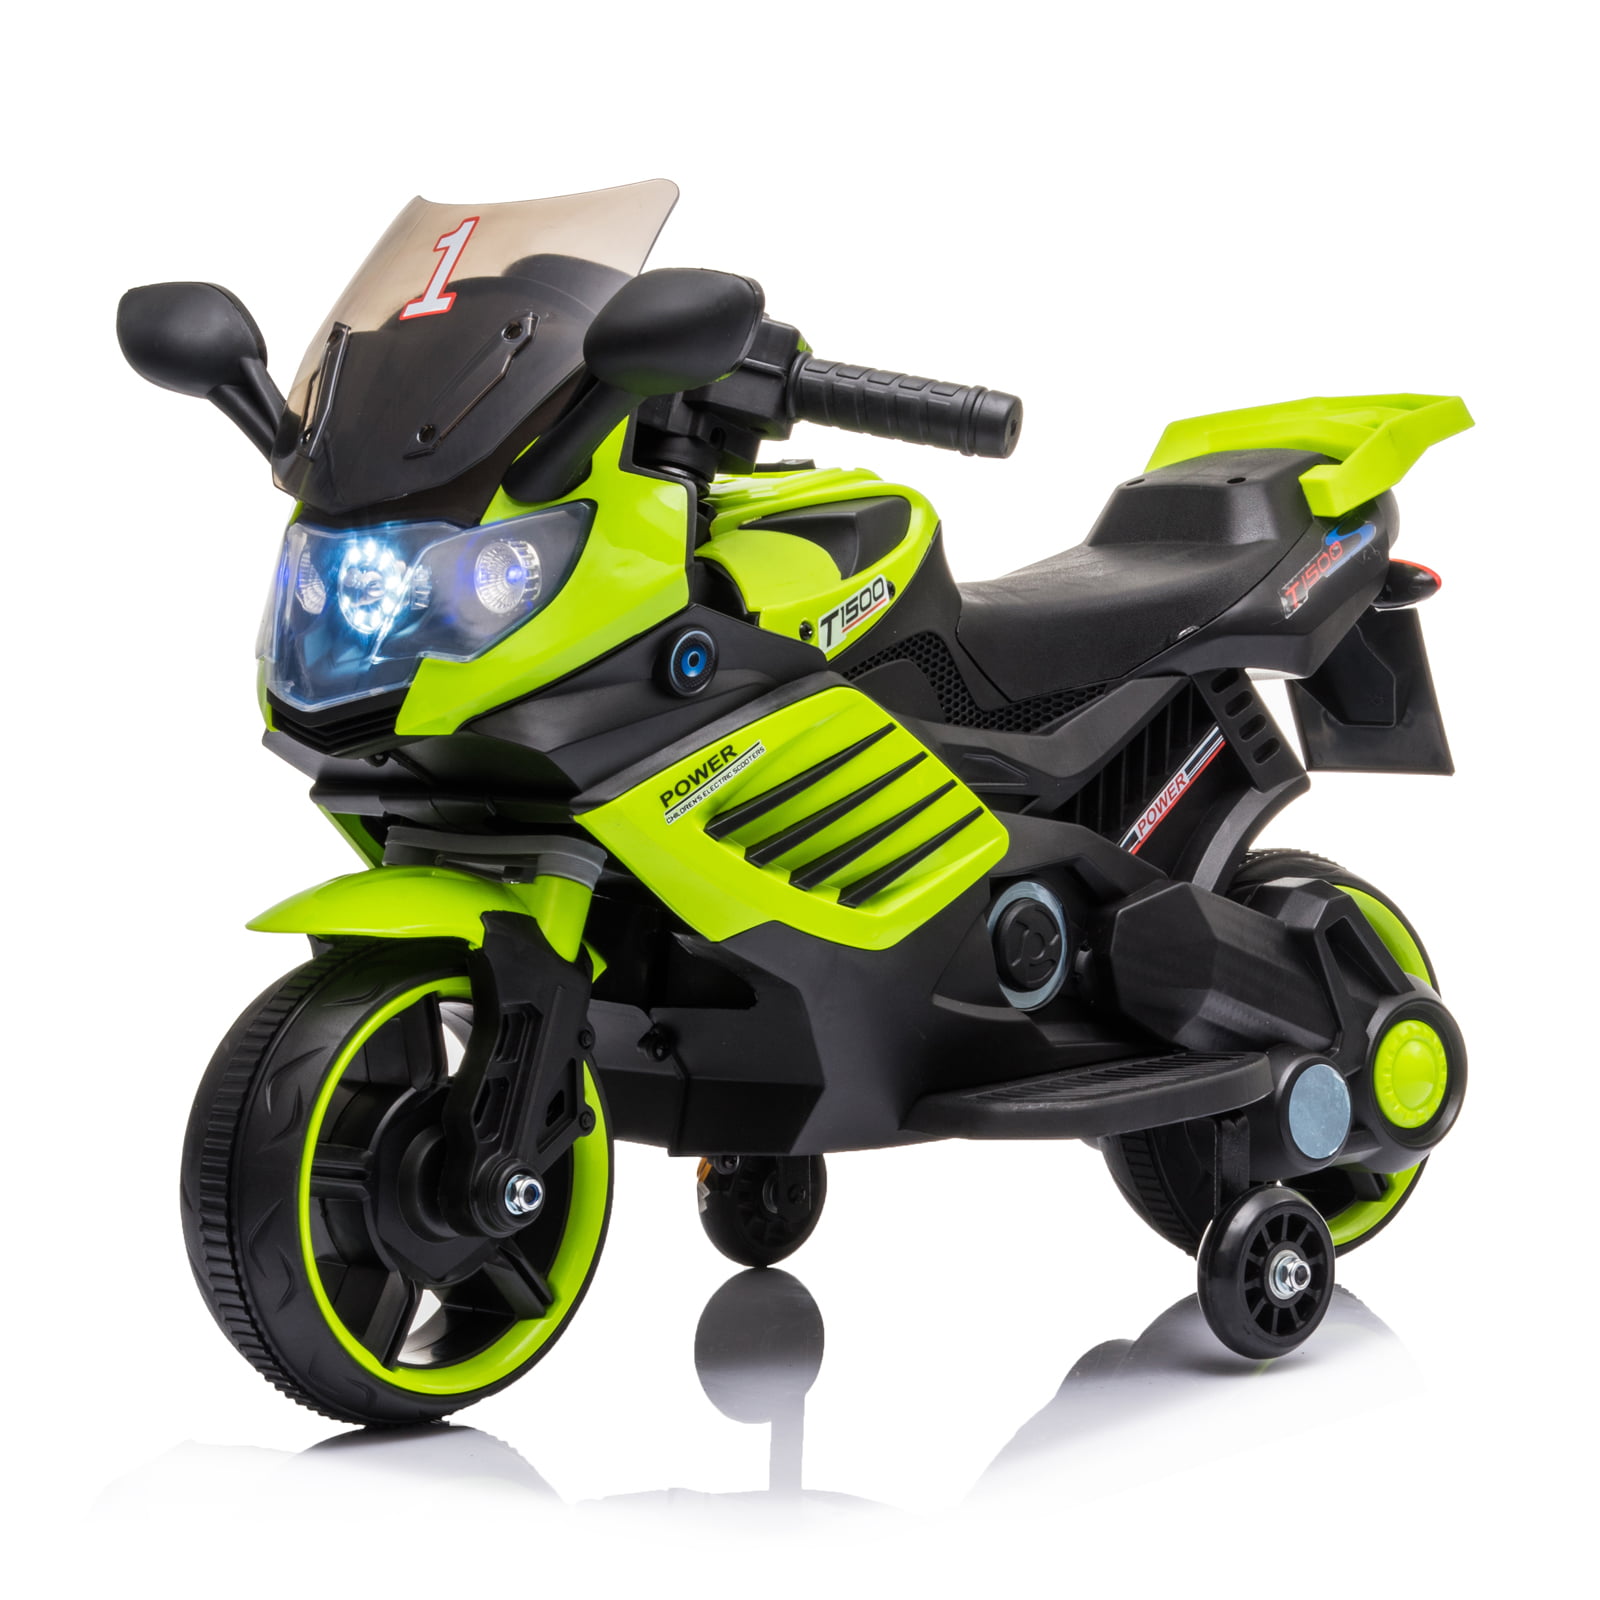 Kids Powered Electric Motorbike Ride-on Motorcycle Toy Car 6V w/ Training Wheels 